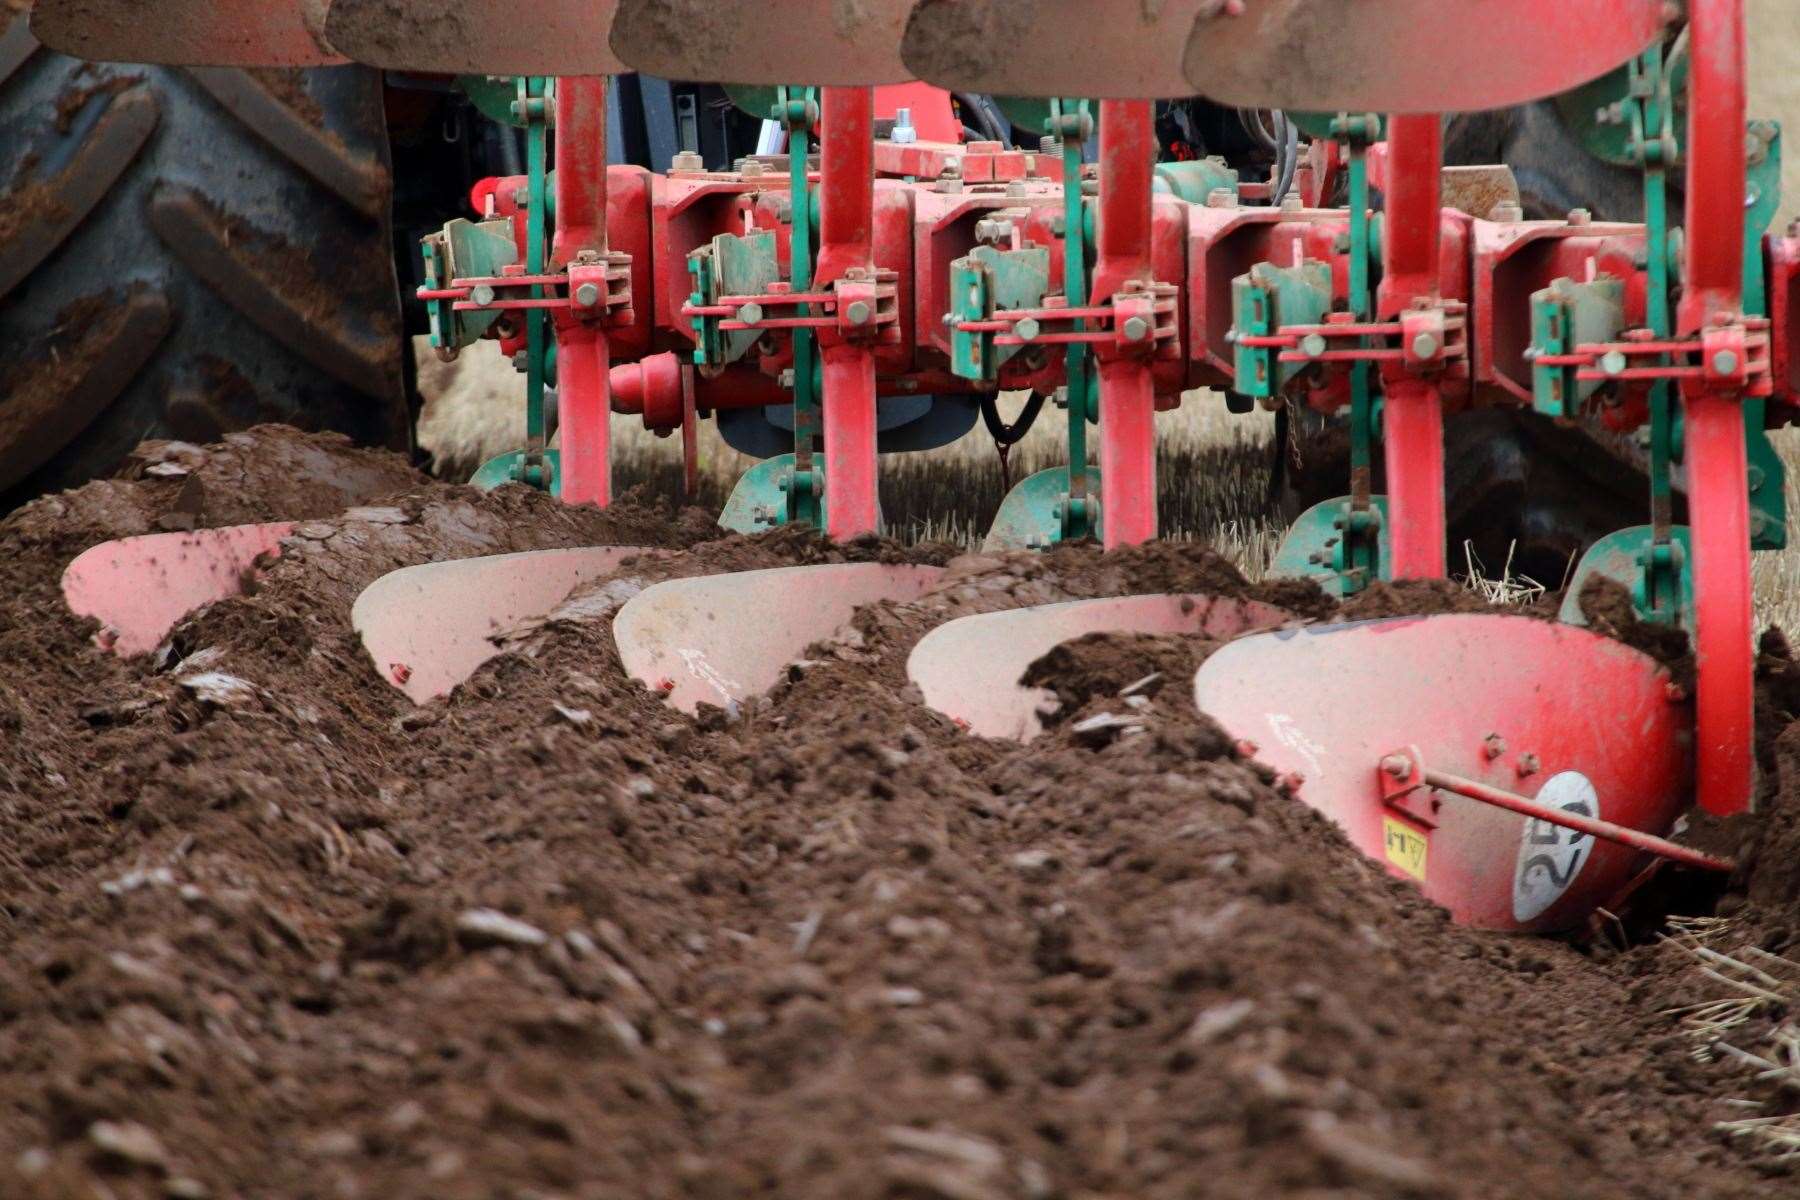 Ploughing matches have been called off for the rest of the season.